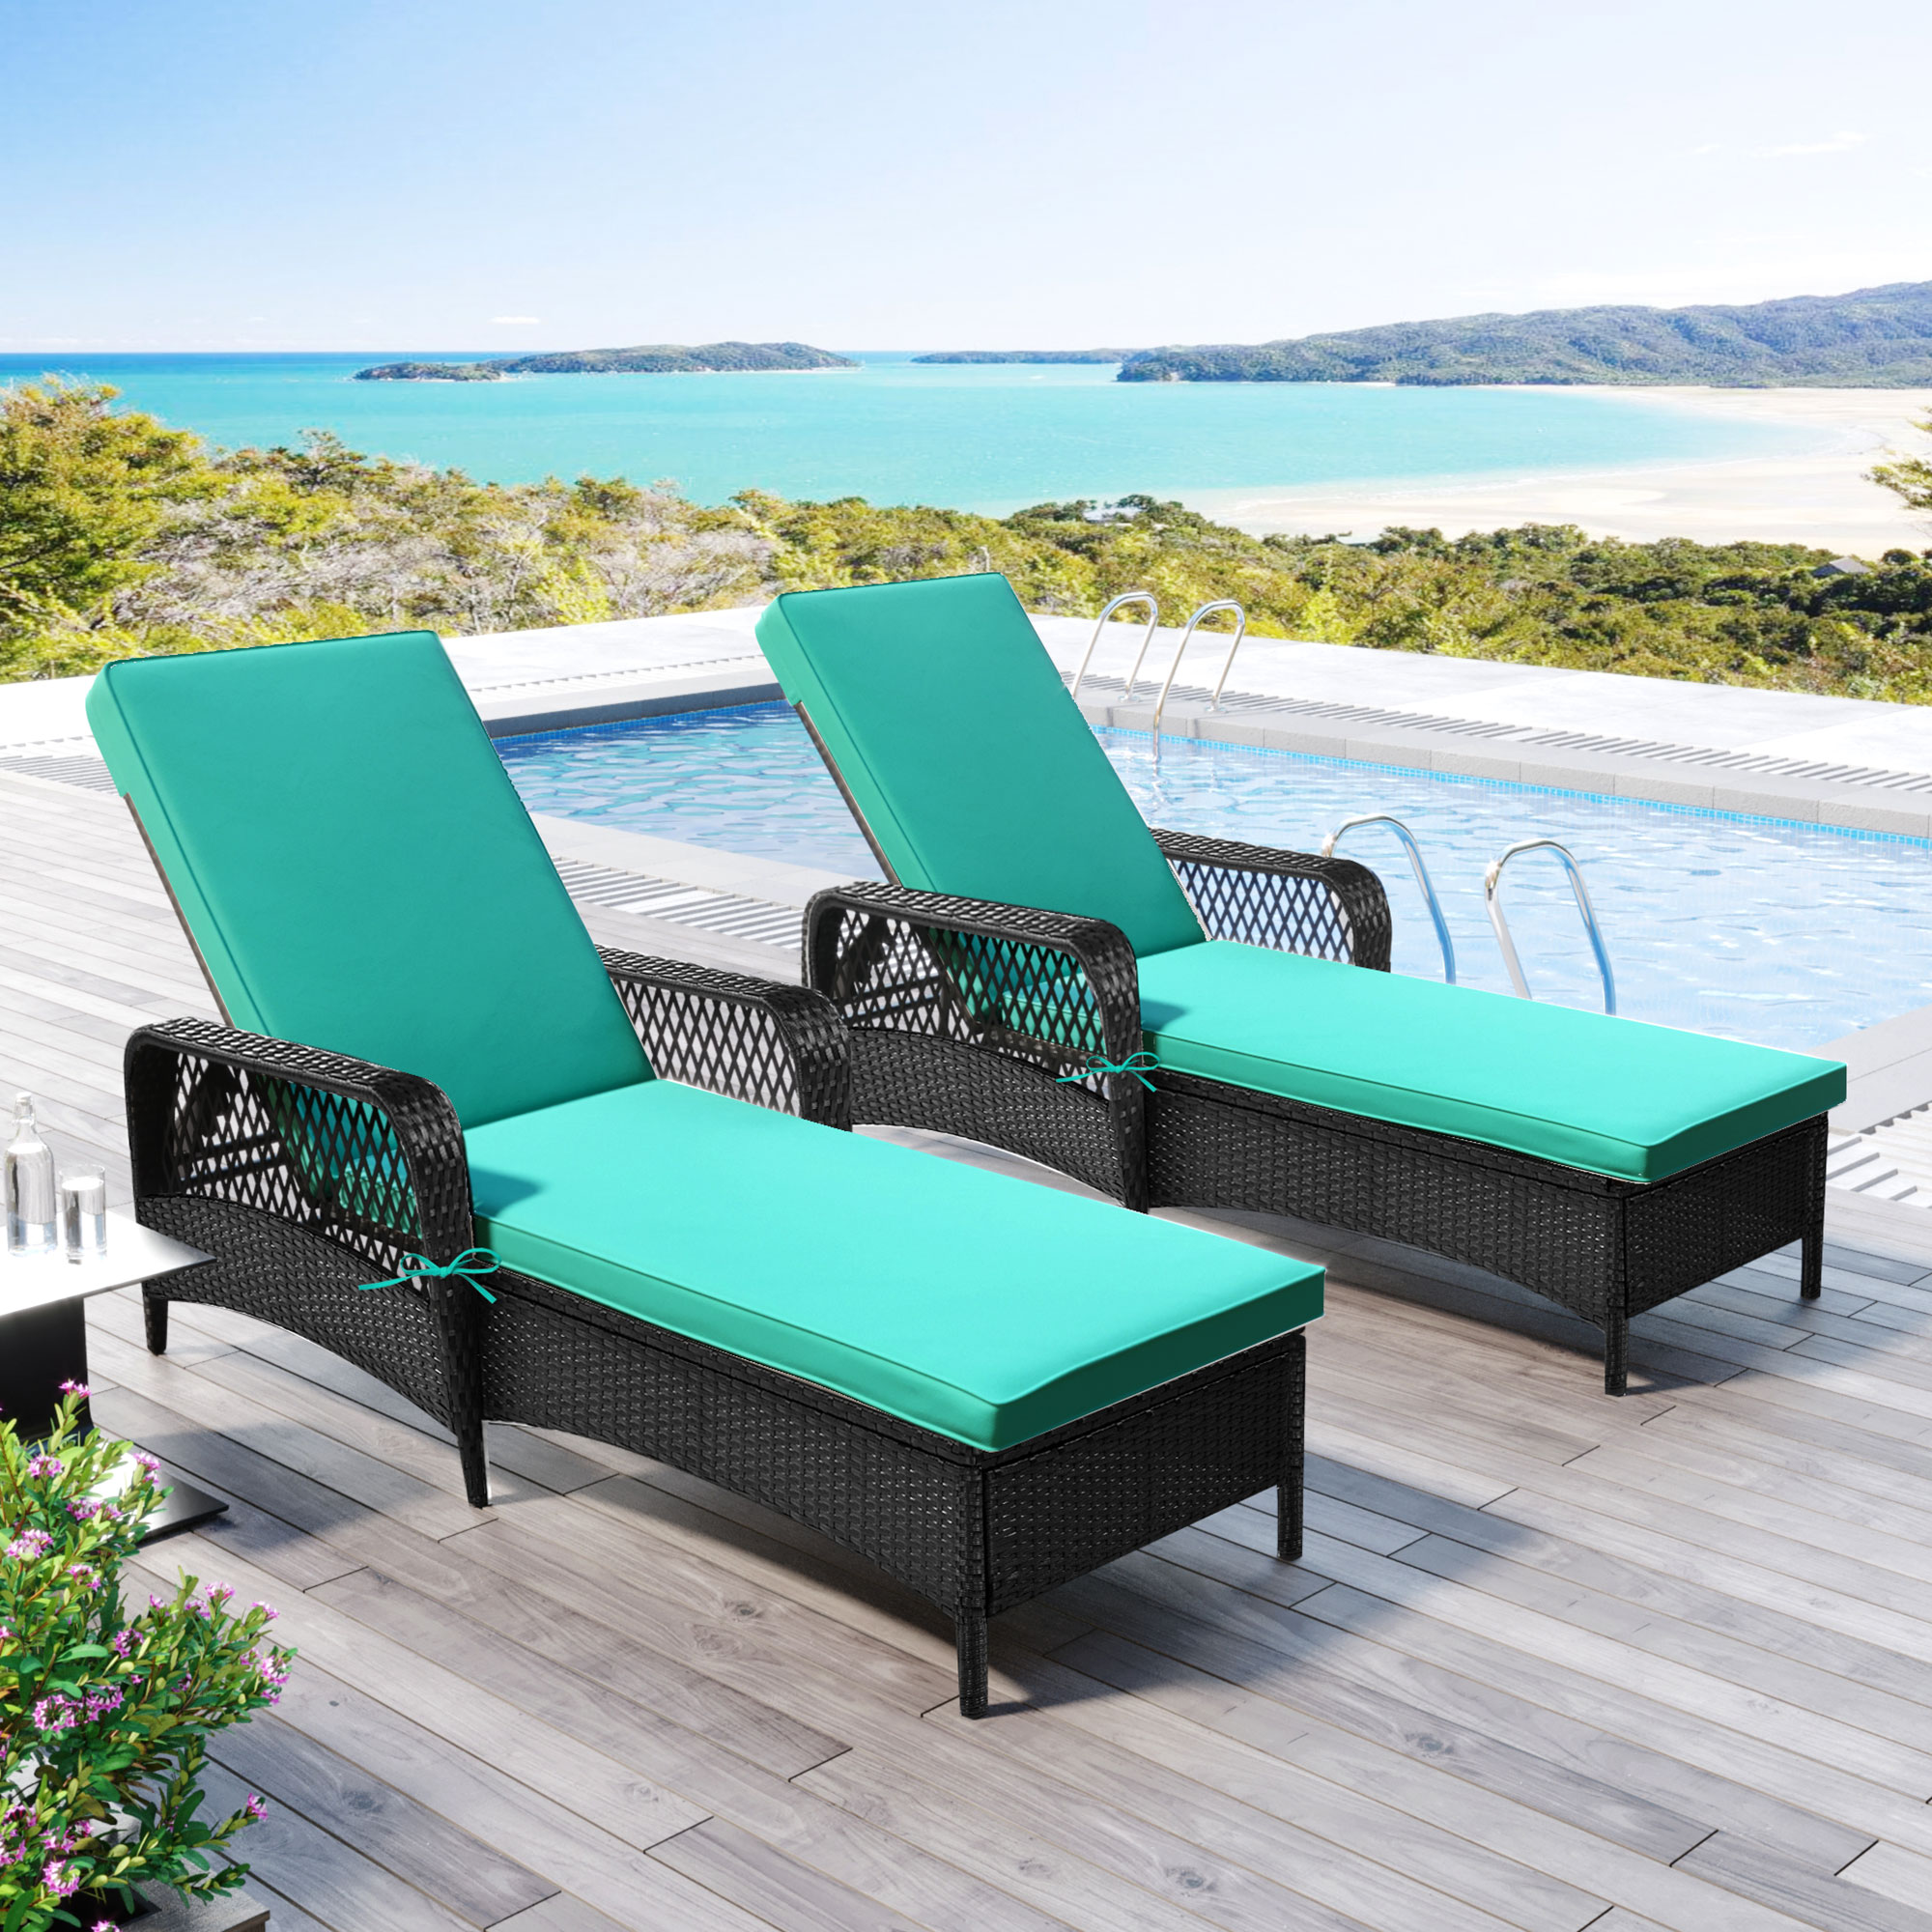 SESSLIFE 2 PCS Patio Lounge Chair Rattan Chaise Lounge Chair with Adjustable Backrest Thickened Cushion, PE Rattan Steel Frame Outdoor Reclining Chaise for Patio Backyard Porch Garden Poolside - image 1 of 9